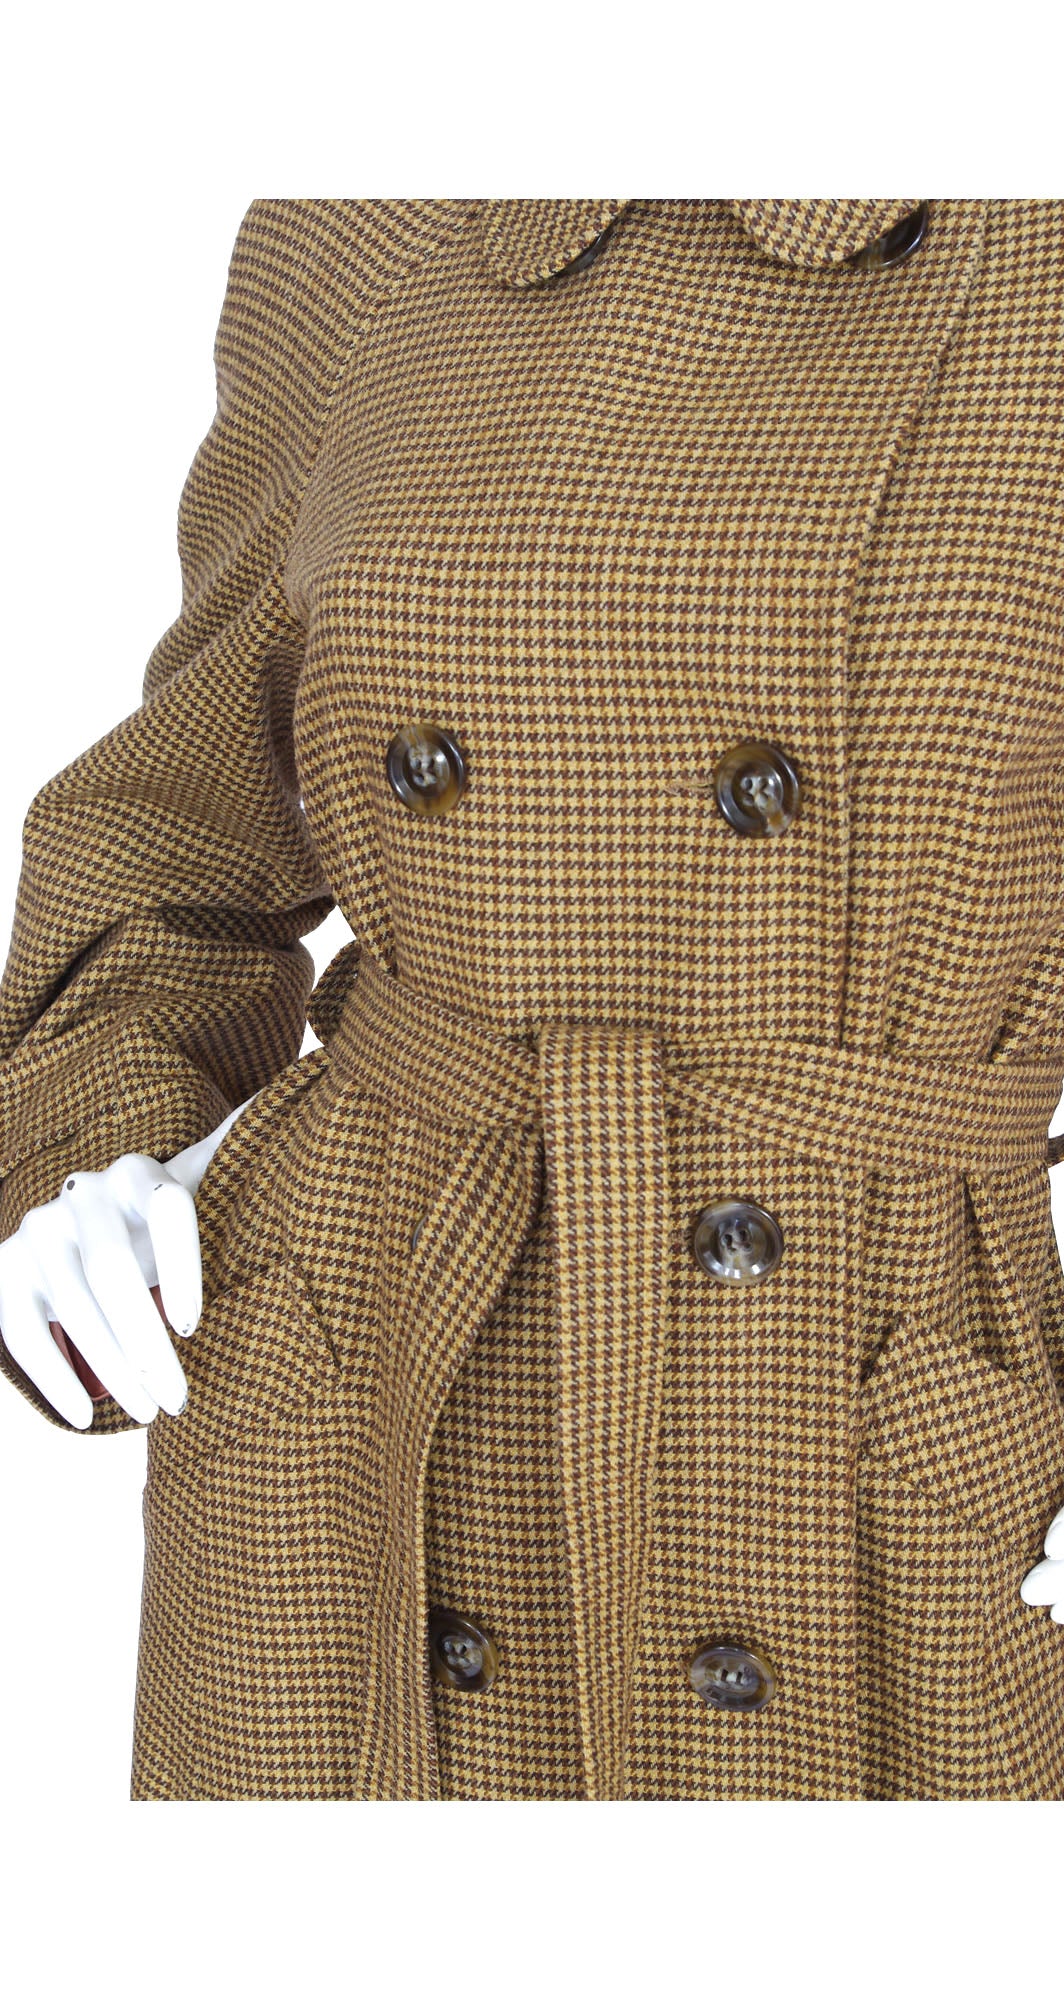 1970s does 1940s Beige Houndstooth Wool Trench Coat